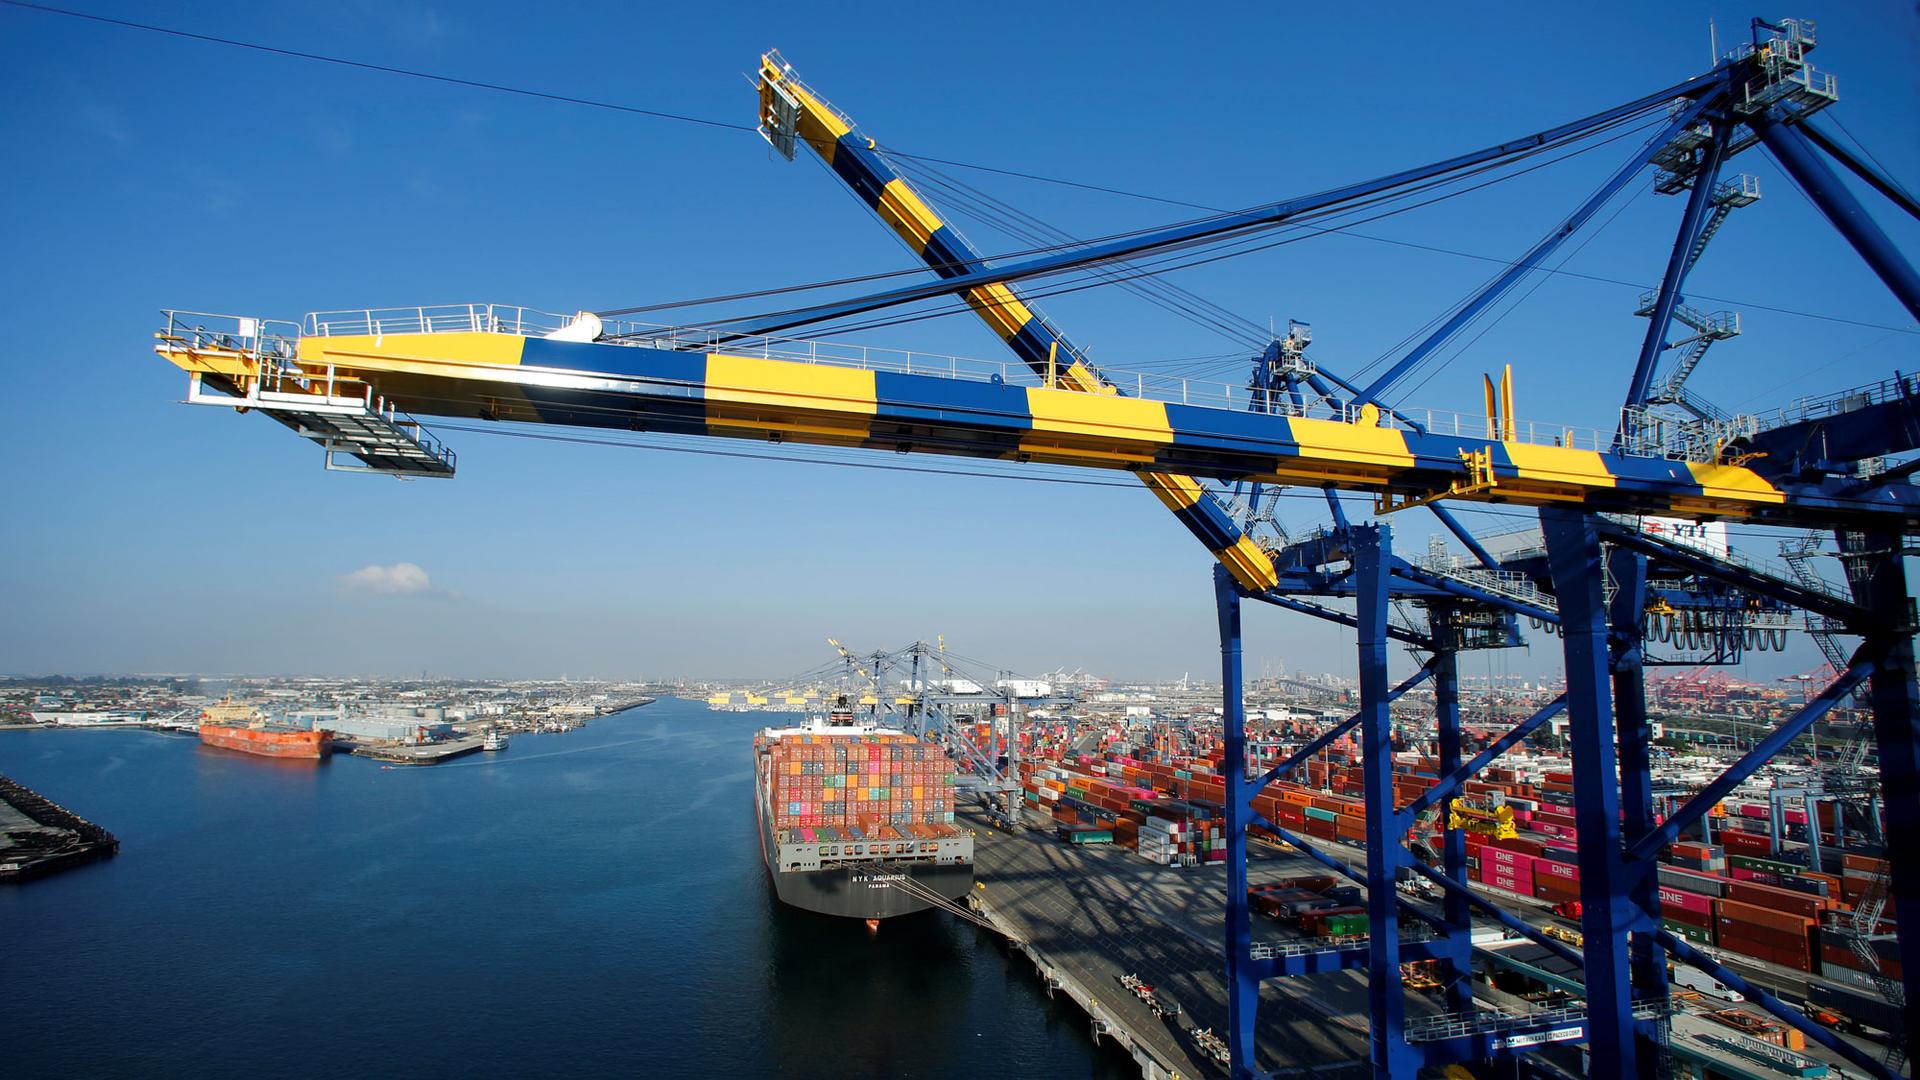 A ship is show loaded with thousands of containers with a blue and yellow crane in the nearground.